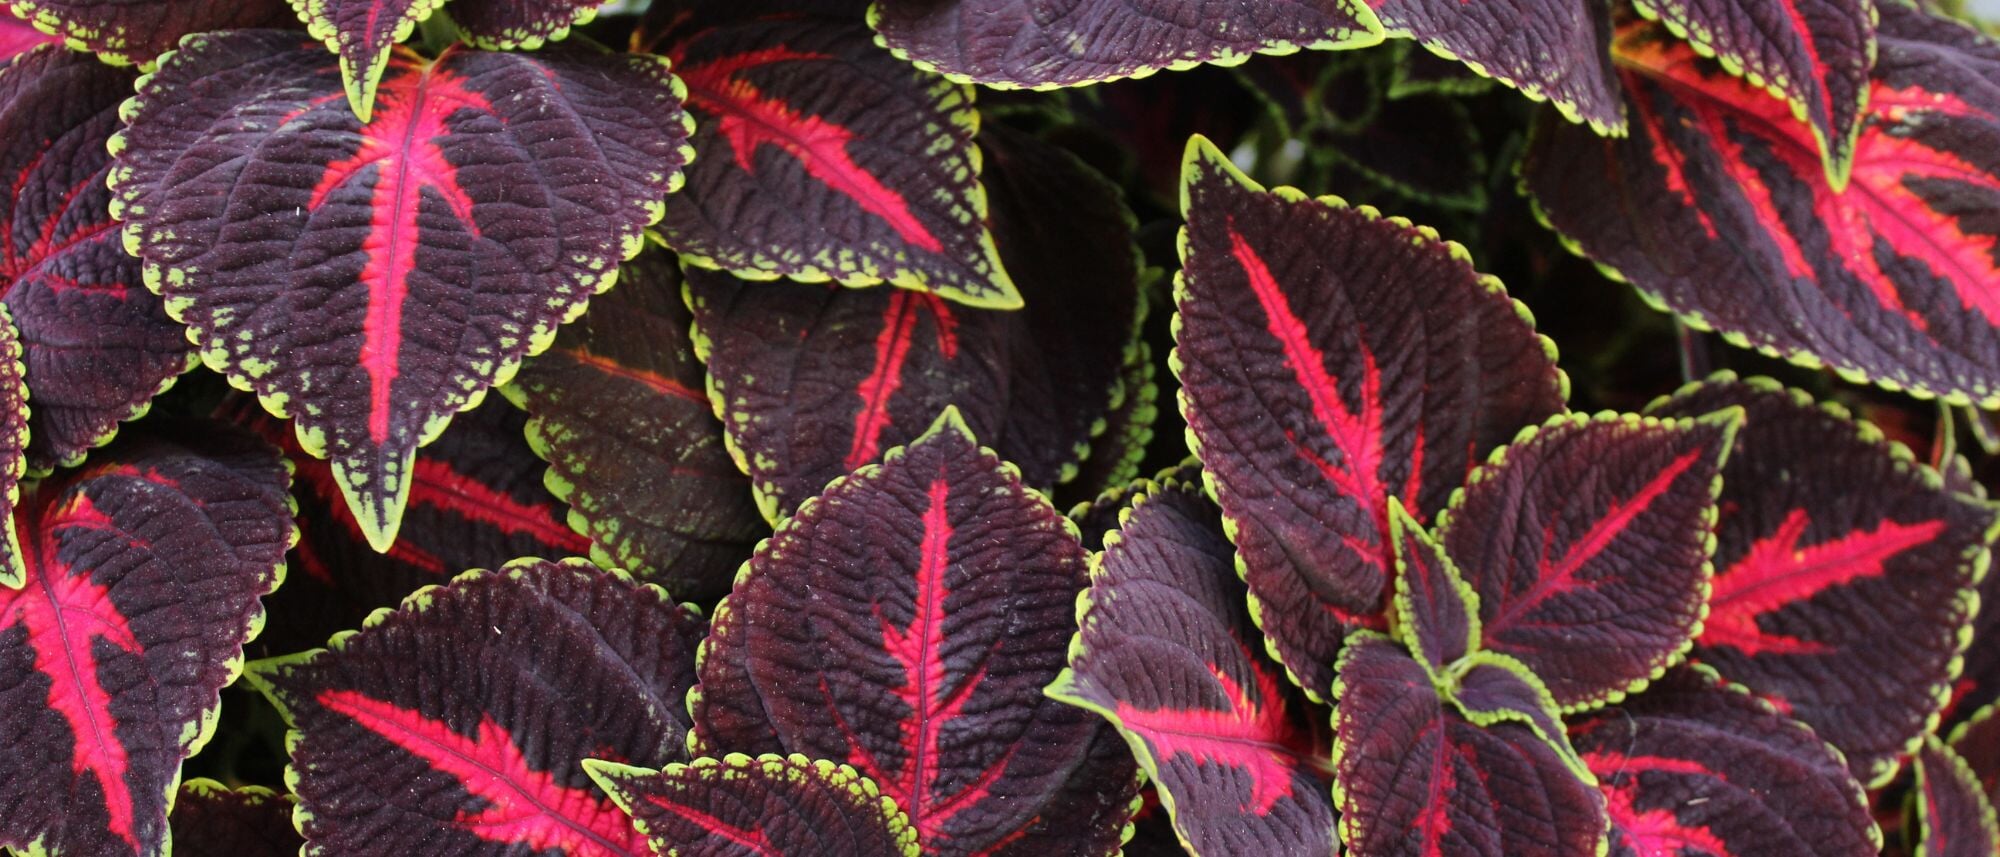 Grow shade tolerant and unique coleus for its wonderful foliage